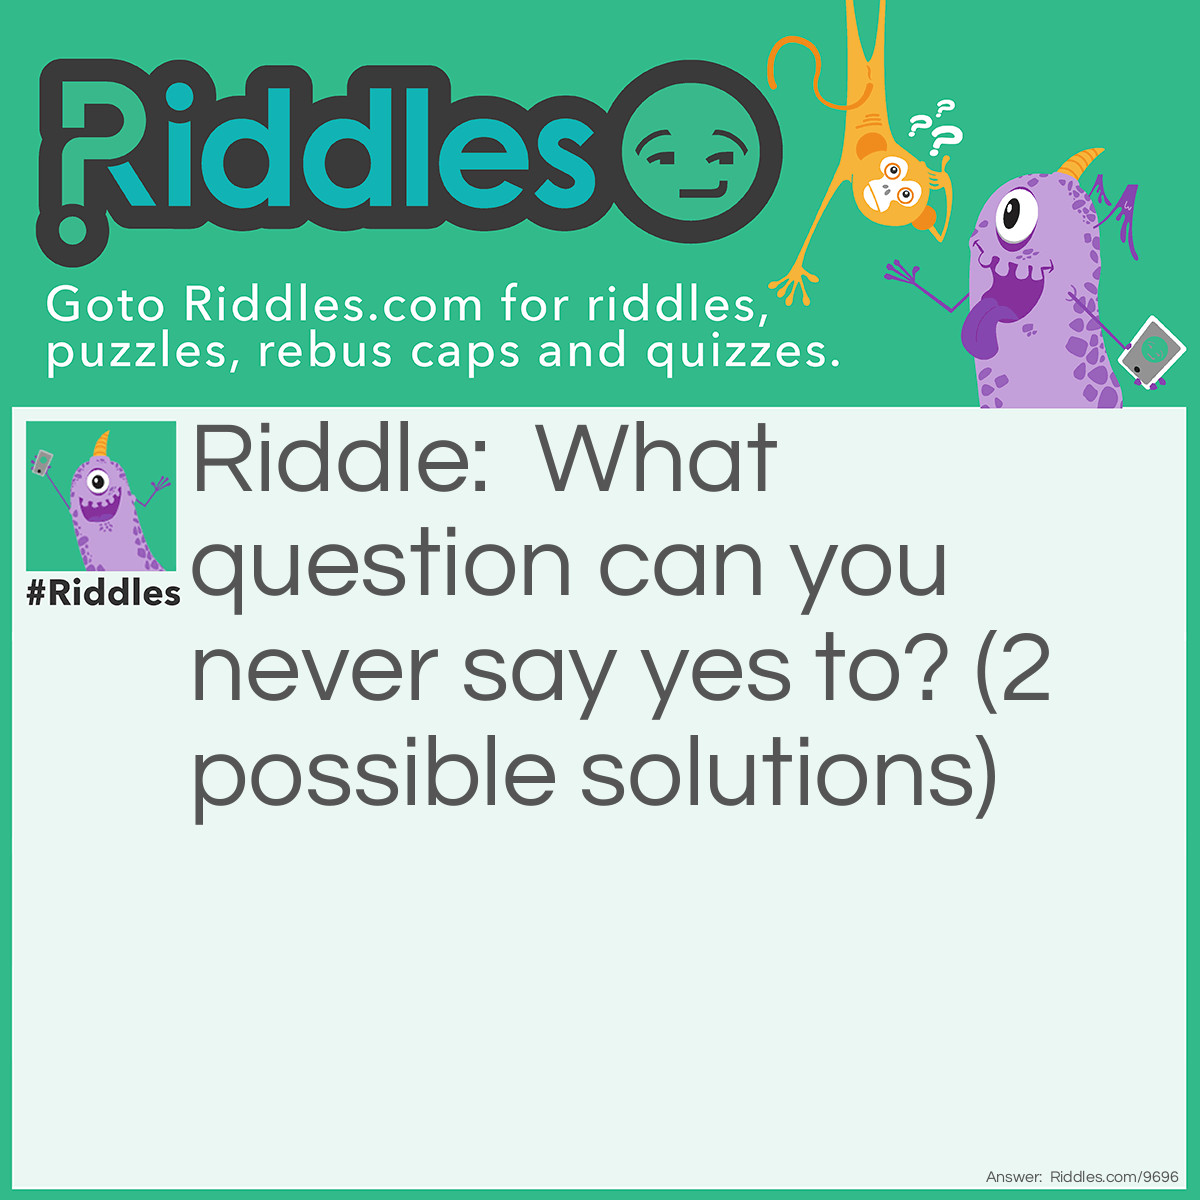 Riddle: What question can you never say yes to? (2 possible solutions) Answer: Are you dead? Are you asleep yet?